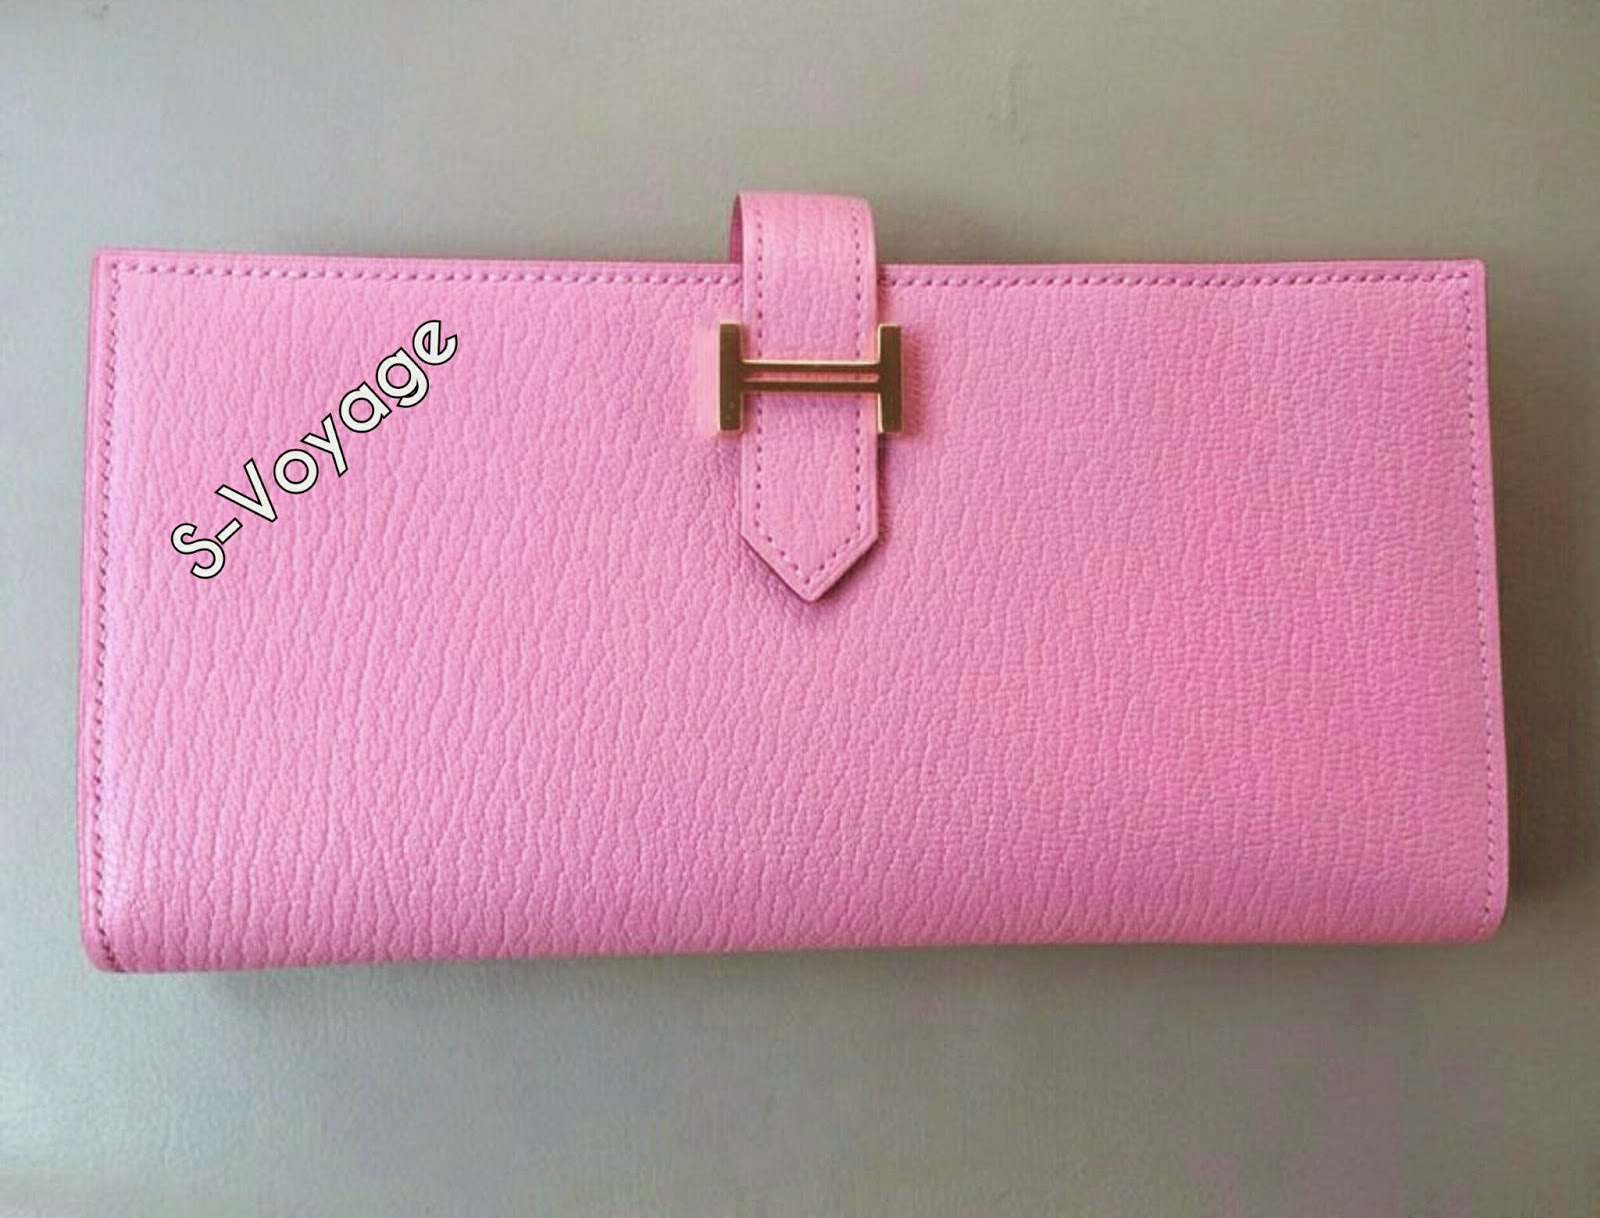 Always Authentic @ S-Voyage: New Hermes Bearn Wallet in Rose Confetti ...